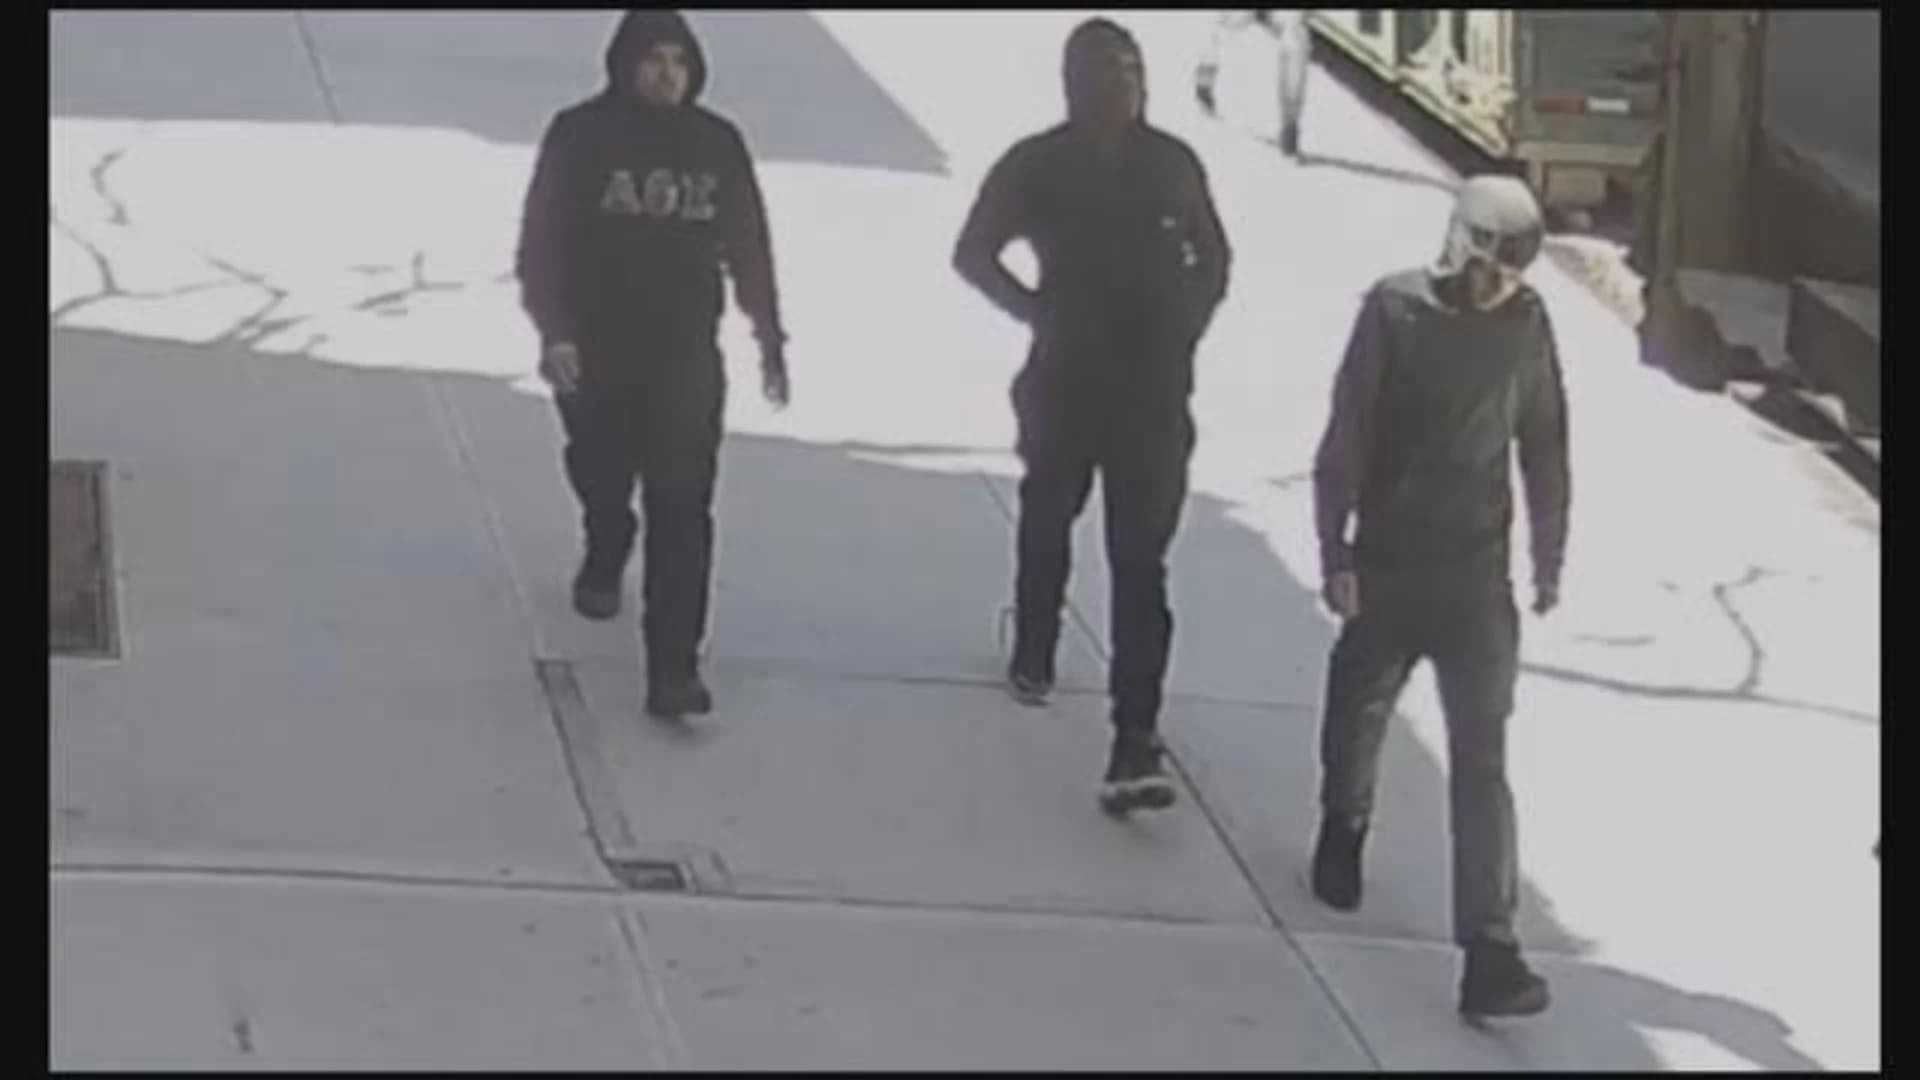 Police: Video shows suspects in fatal Crotona Park shooting